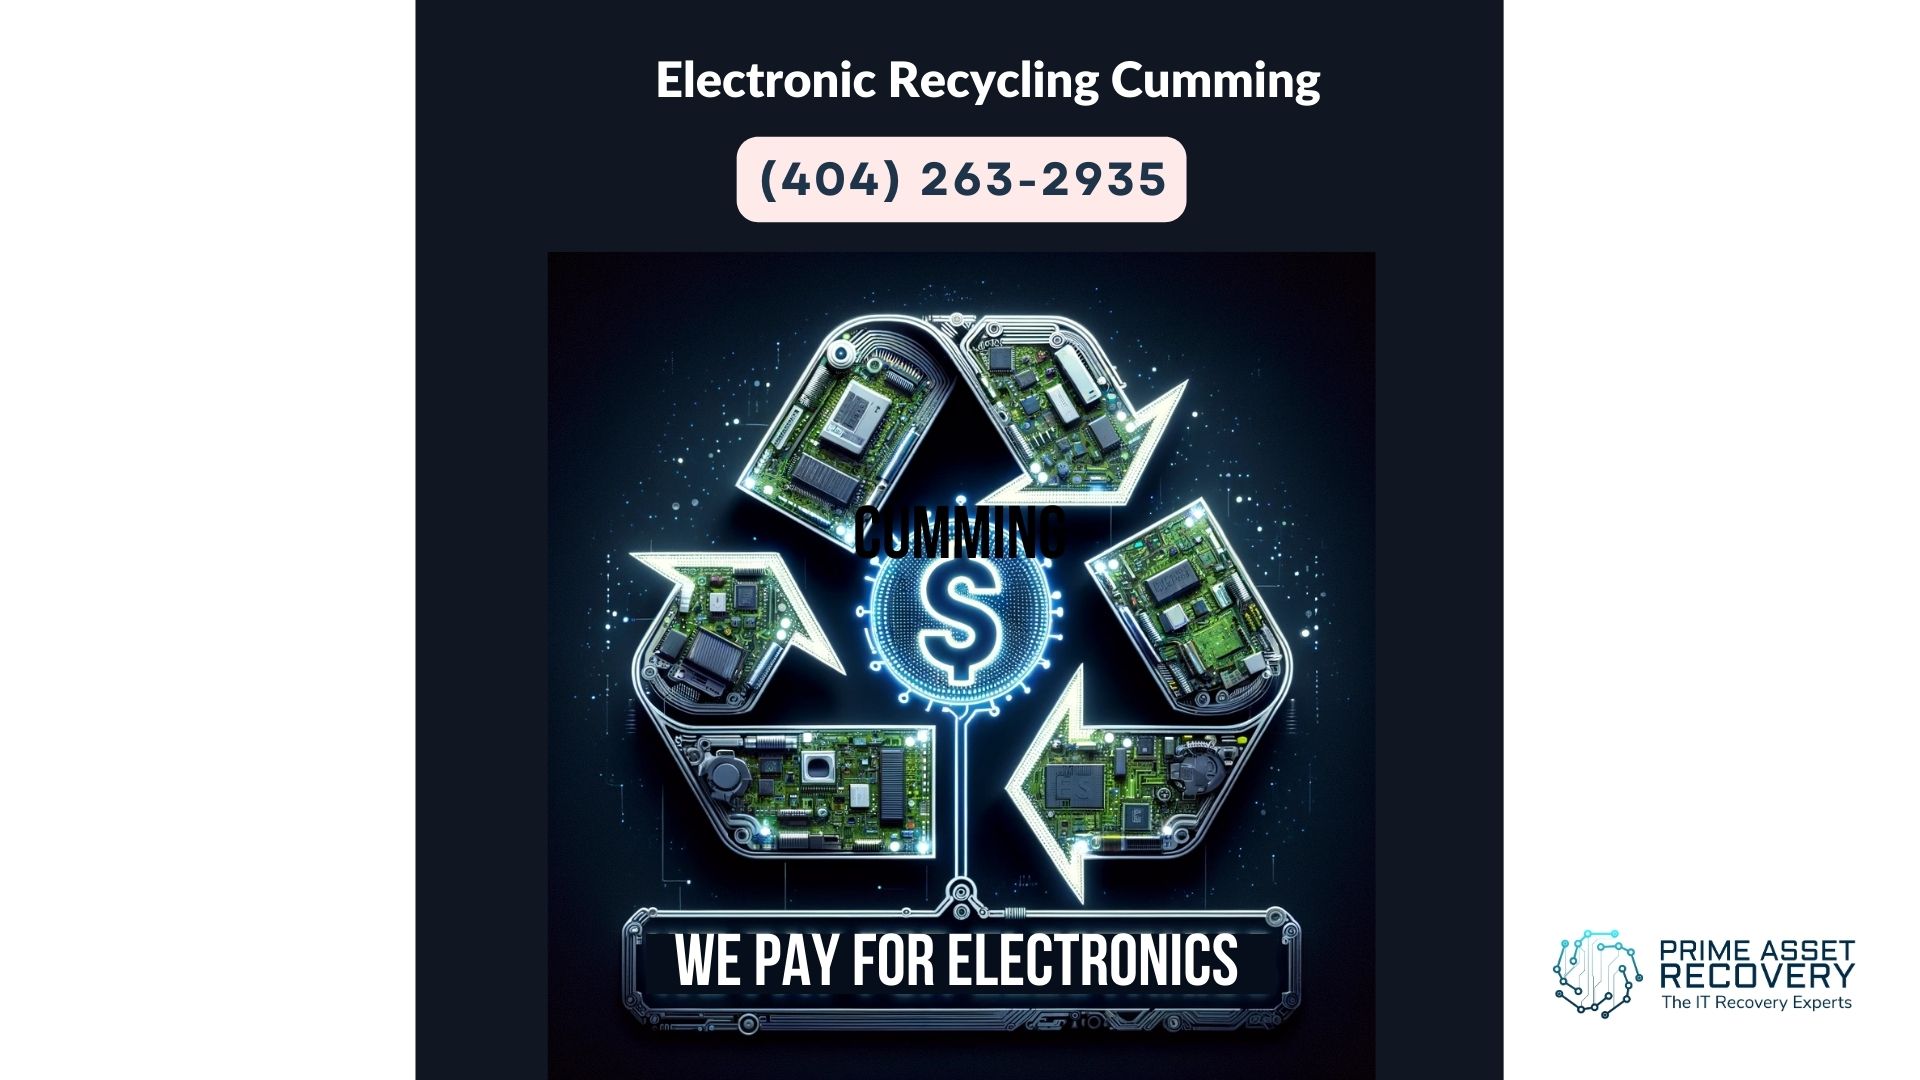 Electronic Recycling Cumming- Prime Asset Recovery Your Partner in Responsible Electronics Recycling